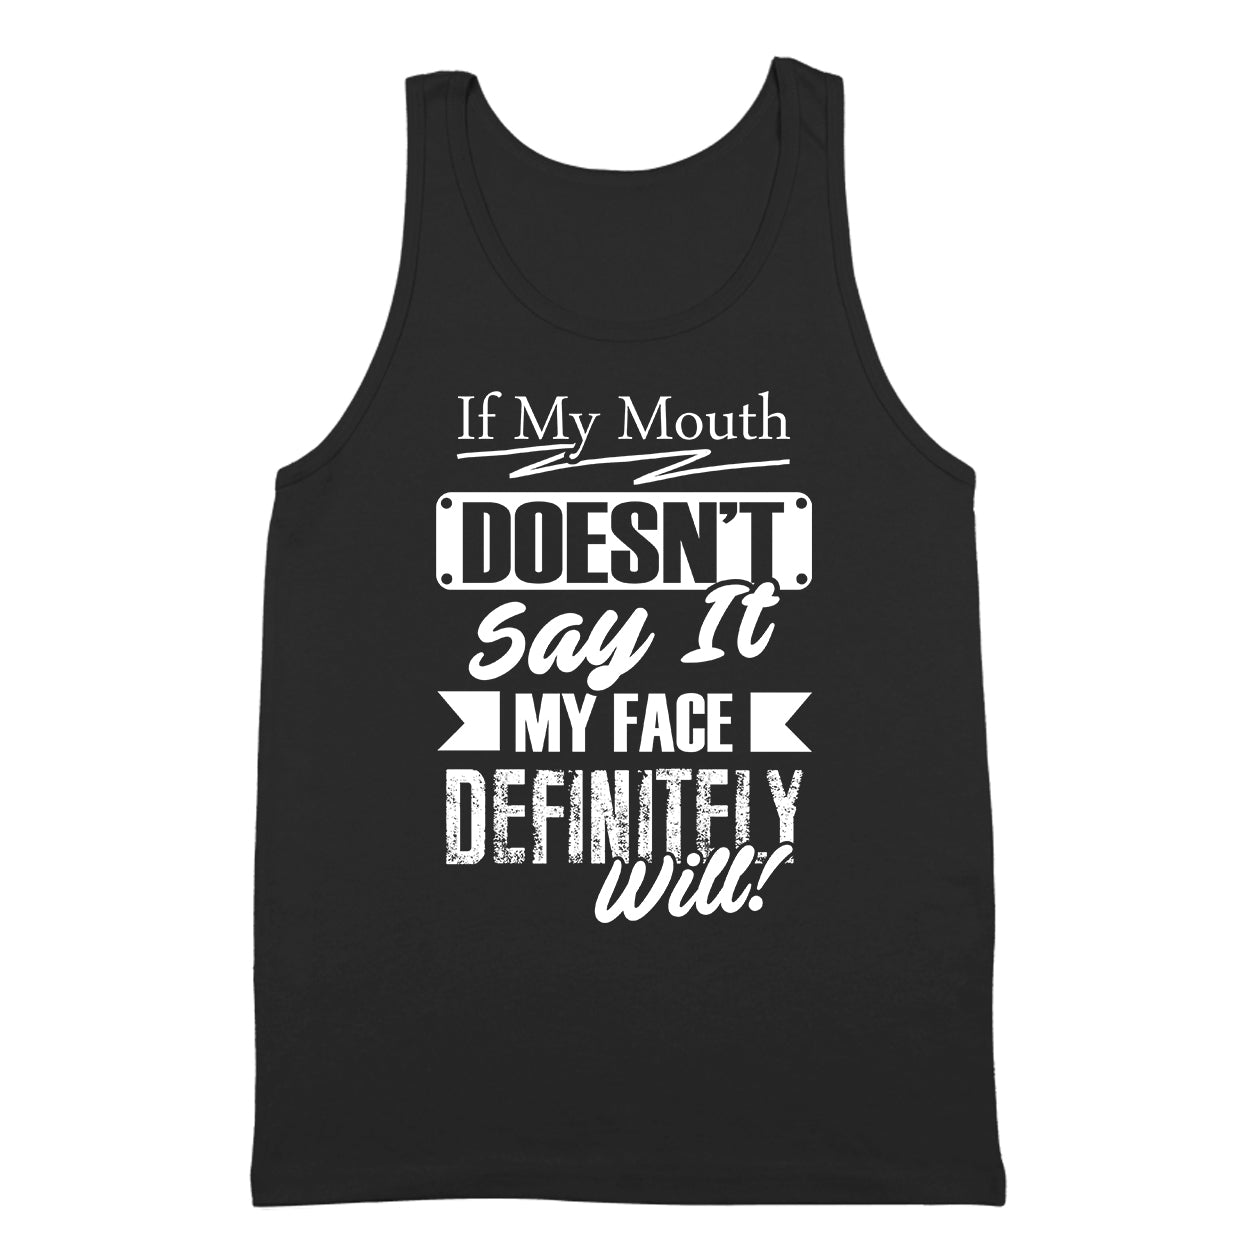 If My Mouth Doesn't Say It Tshirt - Donkey Tees